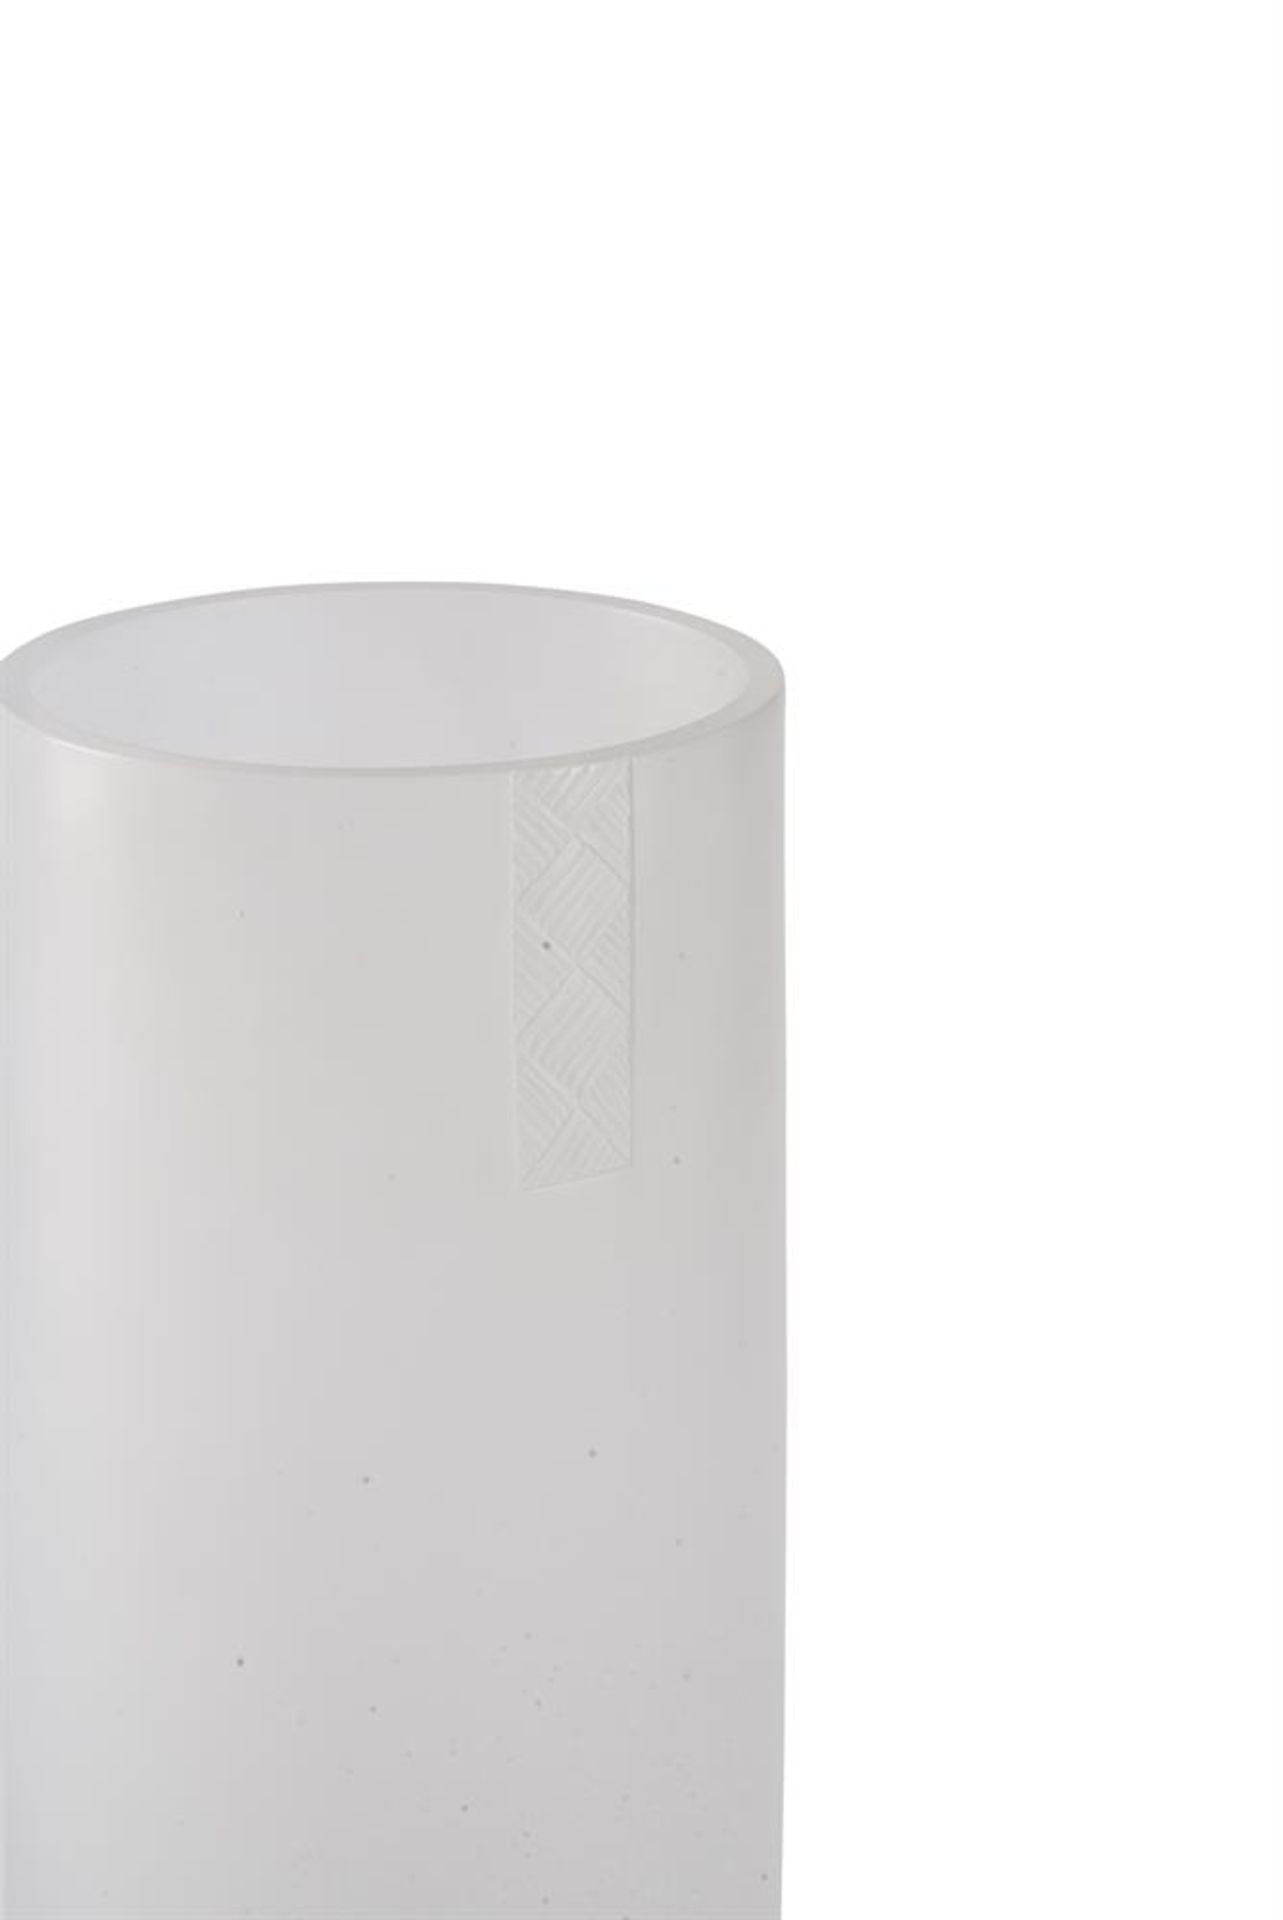 ANN ROBINSON ONZM (NEW ZELAND, B. 1944), A FROSTED GLASS CYLINDRICAL TAPERED VASE - Image 2 of 2